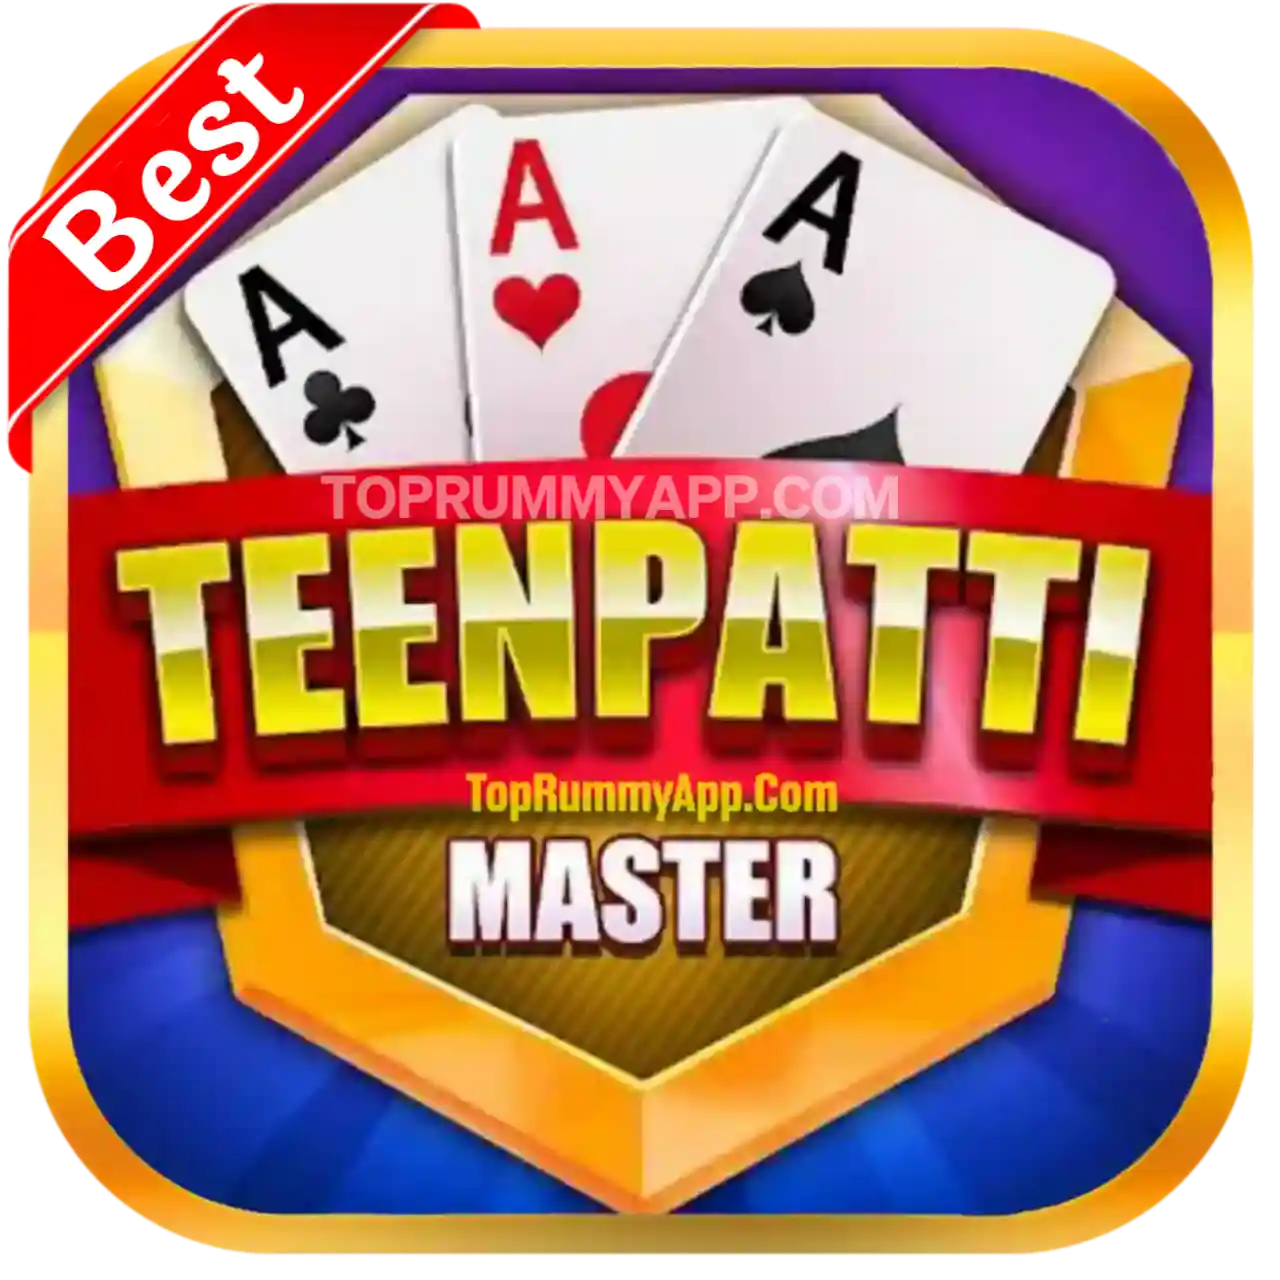 Teen Patti Master Download All 7 Up Down Earning App List